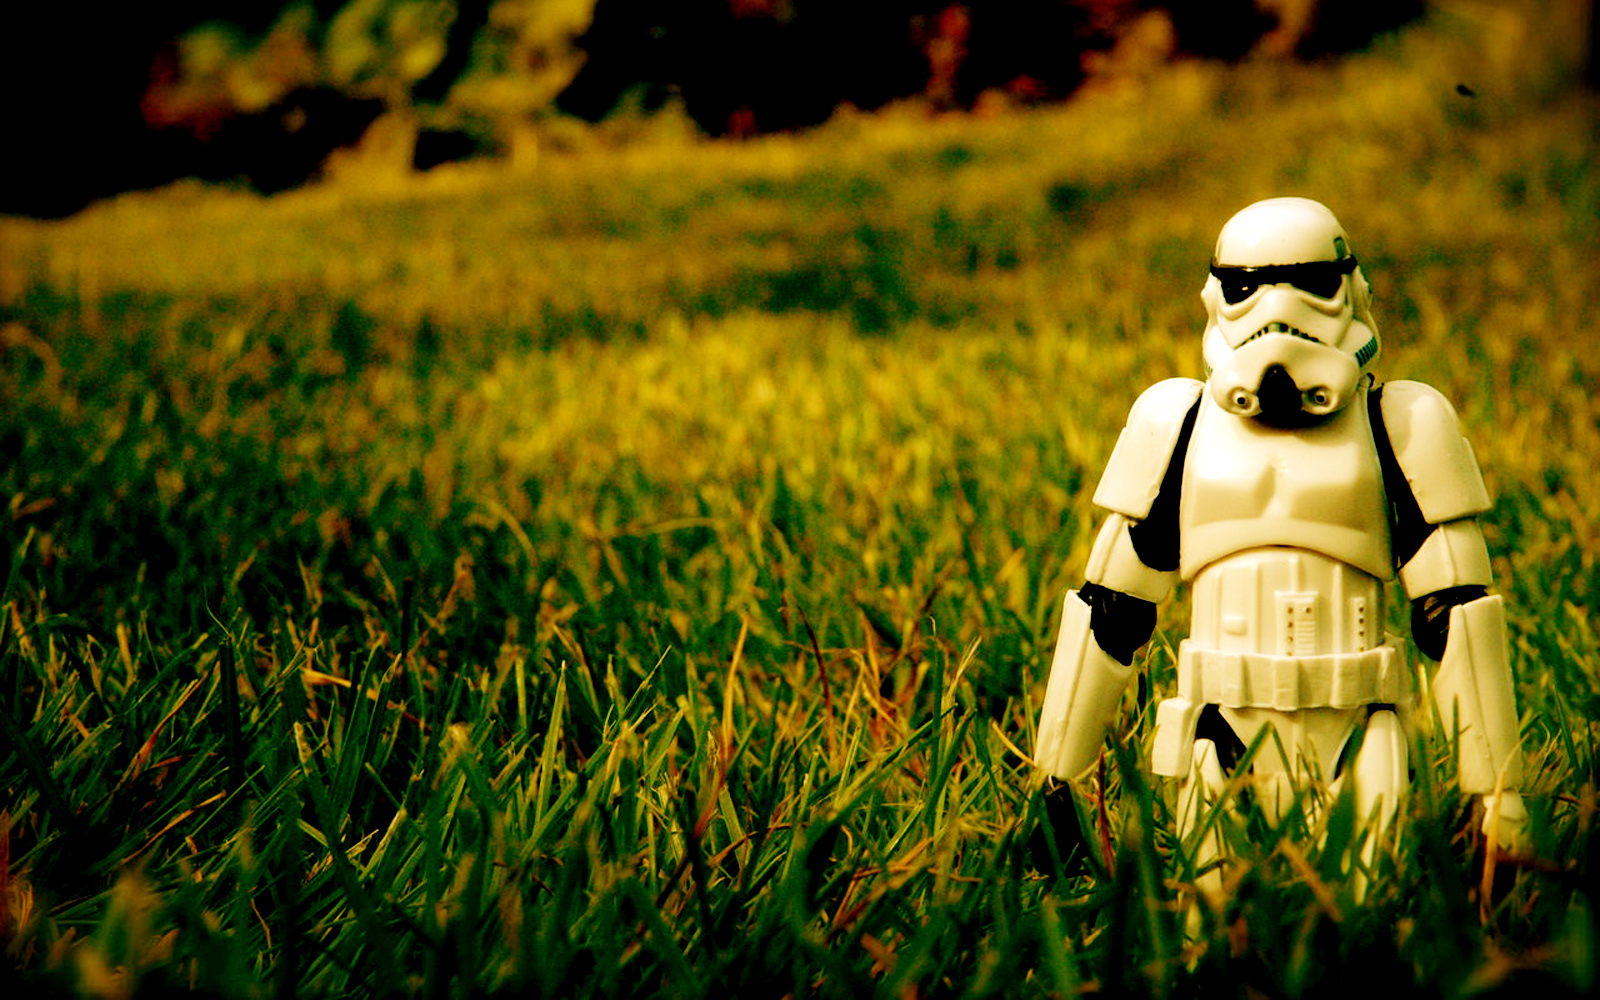 Central Wallpaper: Stormtroopers Star Wars HD Wallpapers